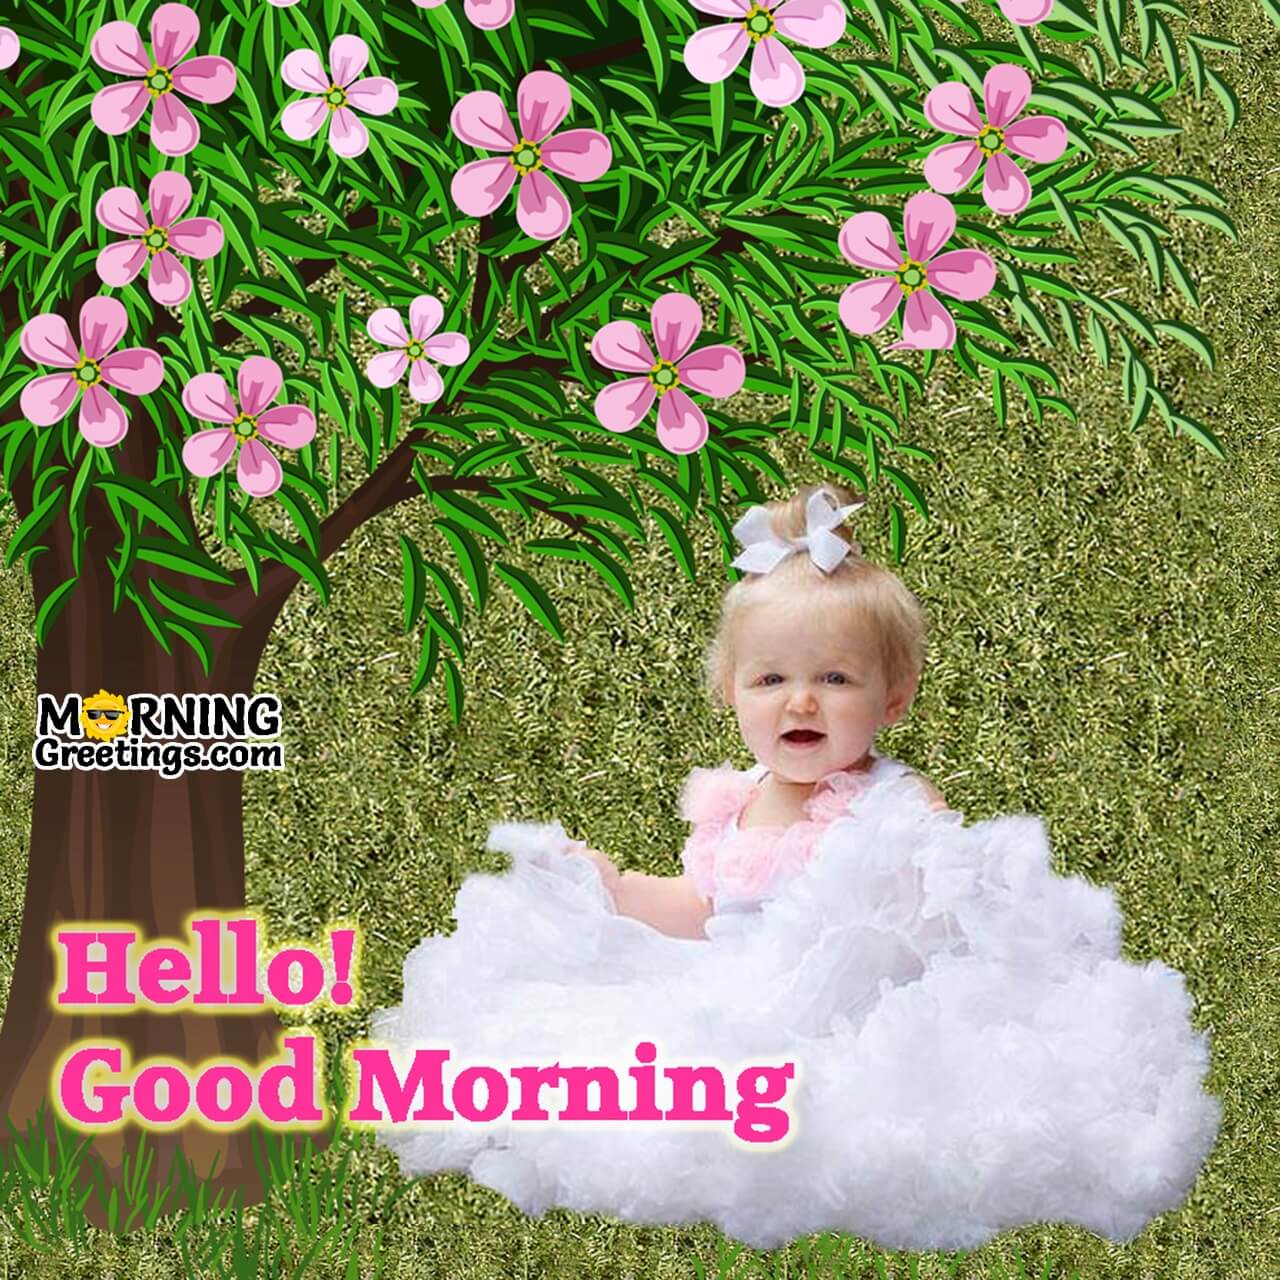 15 Best Good Morning Images Of Babies - Morning Greetings ...